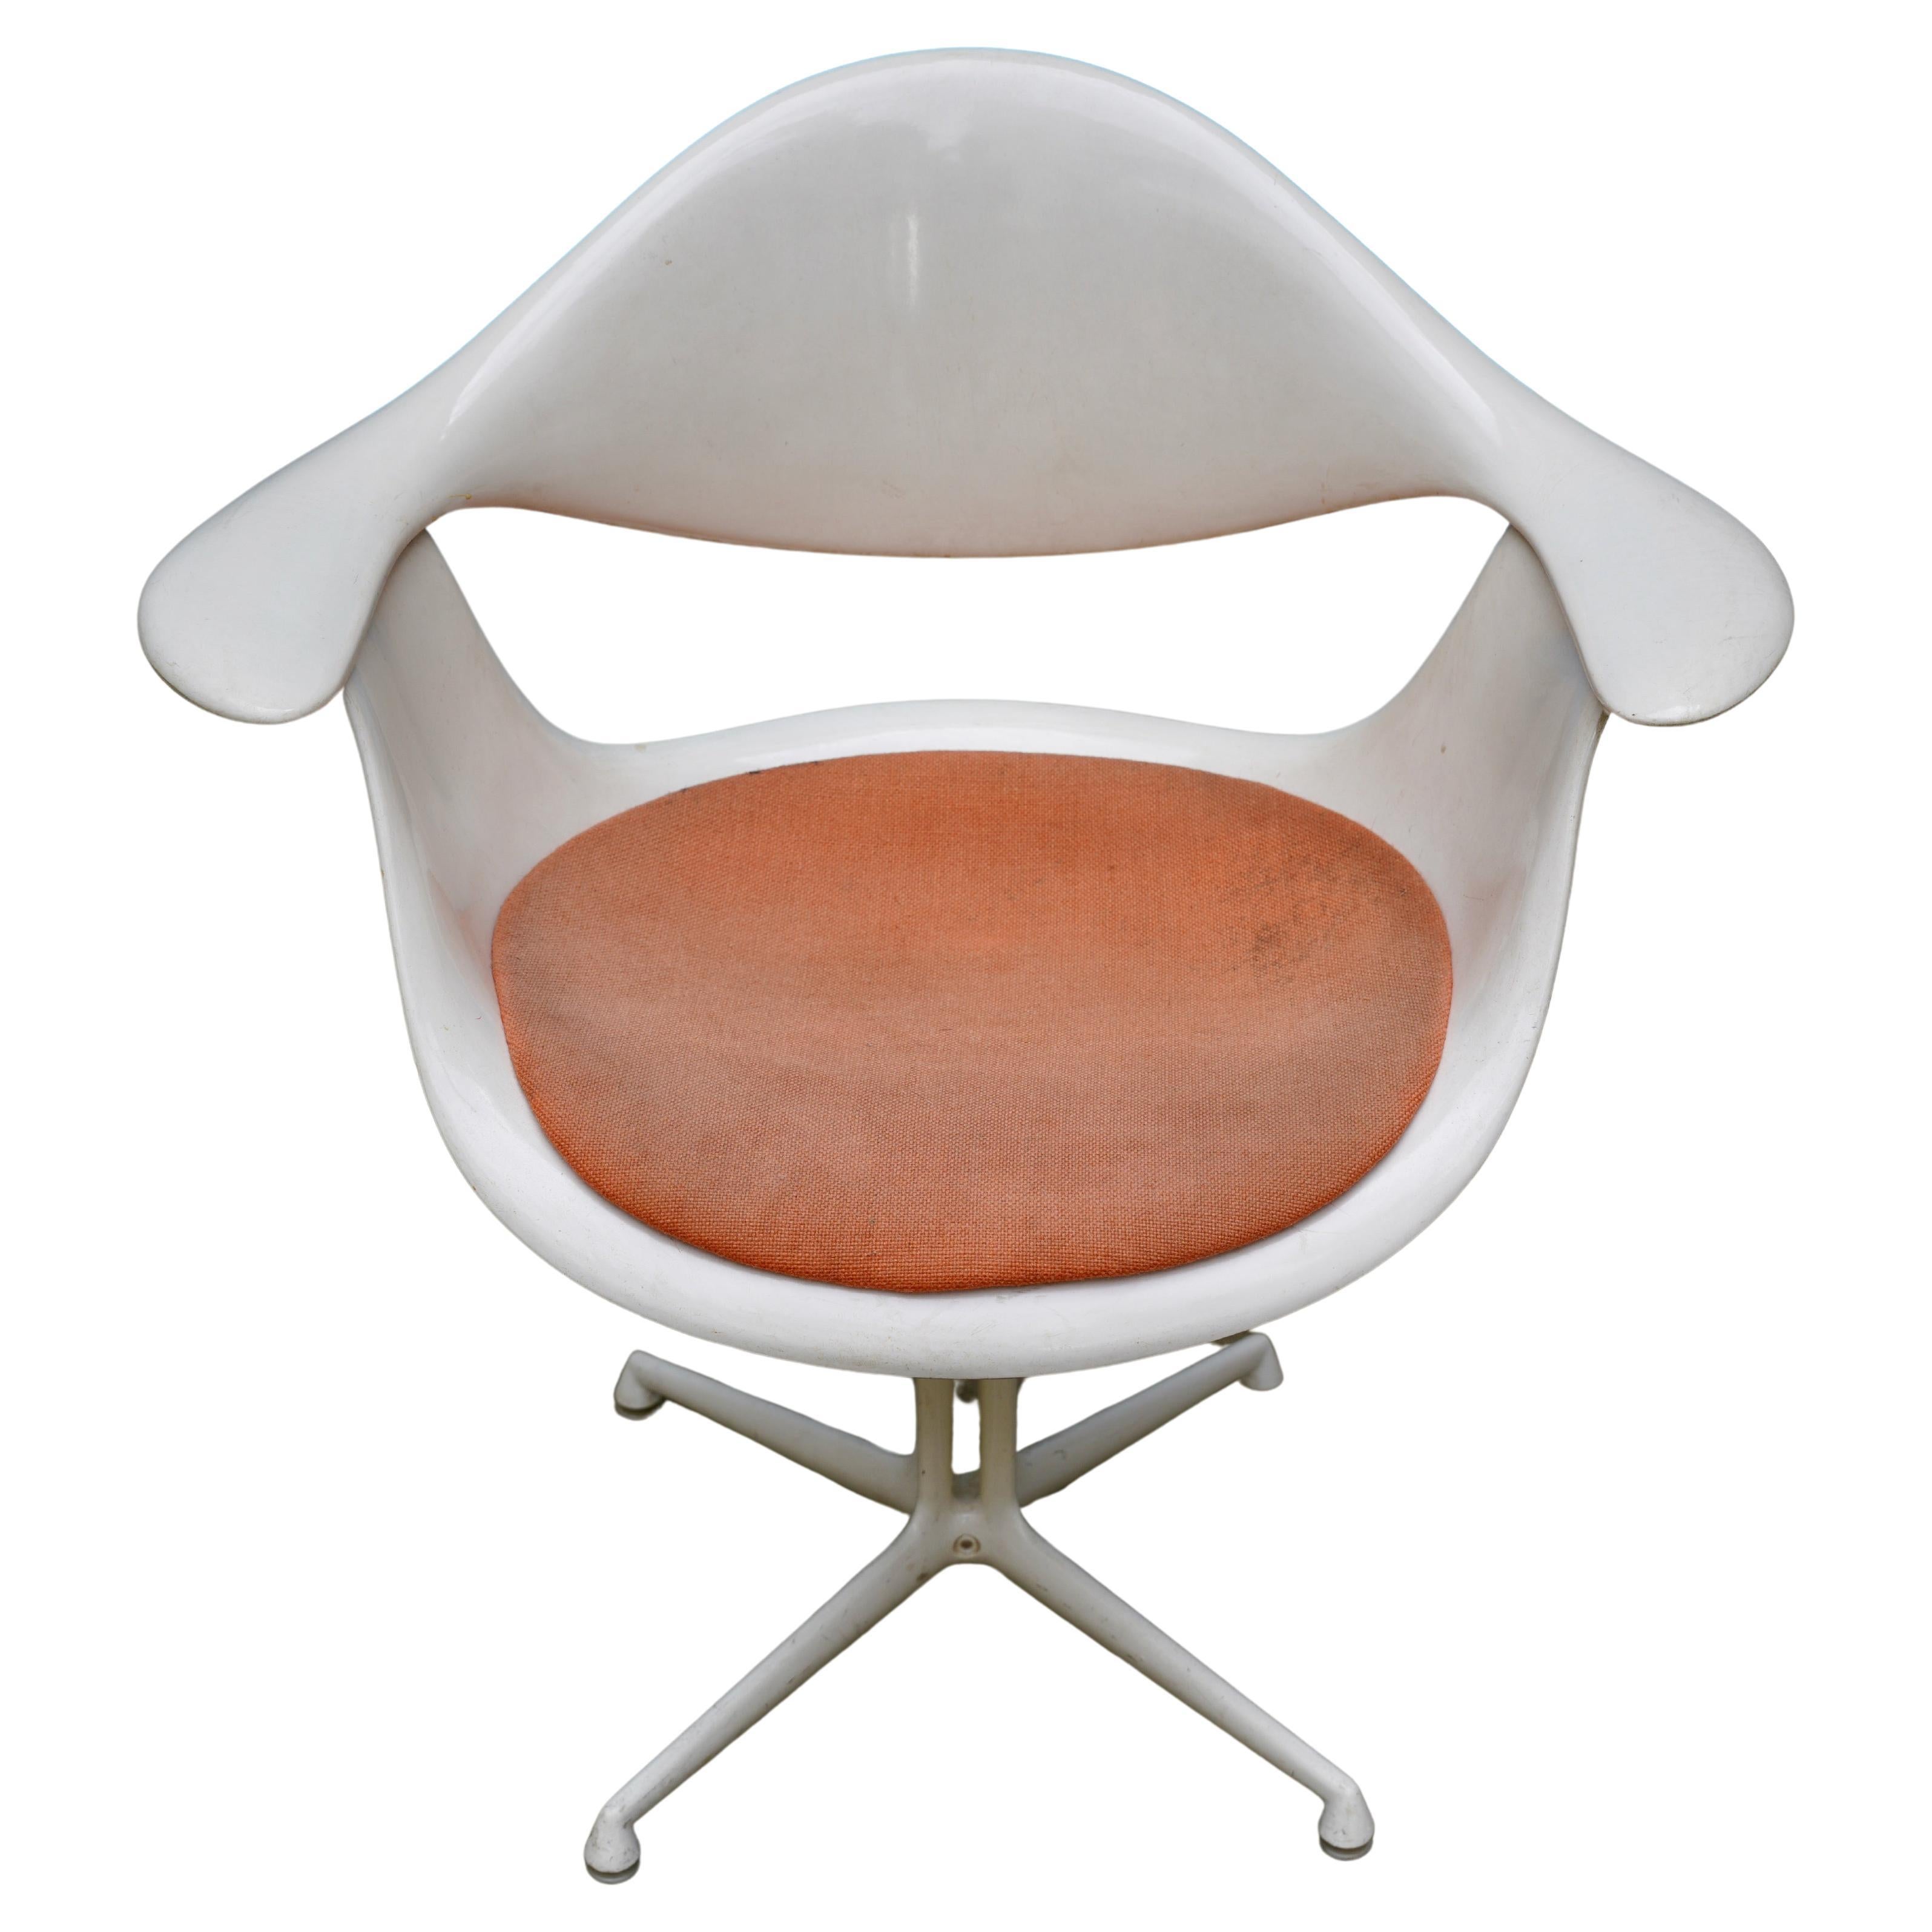 Swag Leg Chair by George Nelson for Herman Miller - 1950s, La Fonda, Space Age